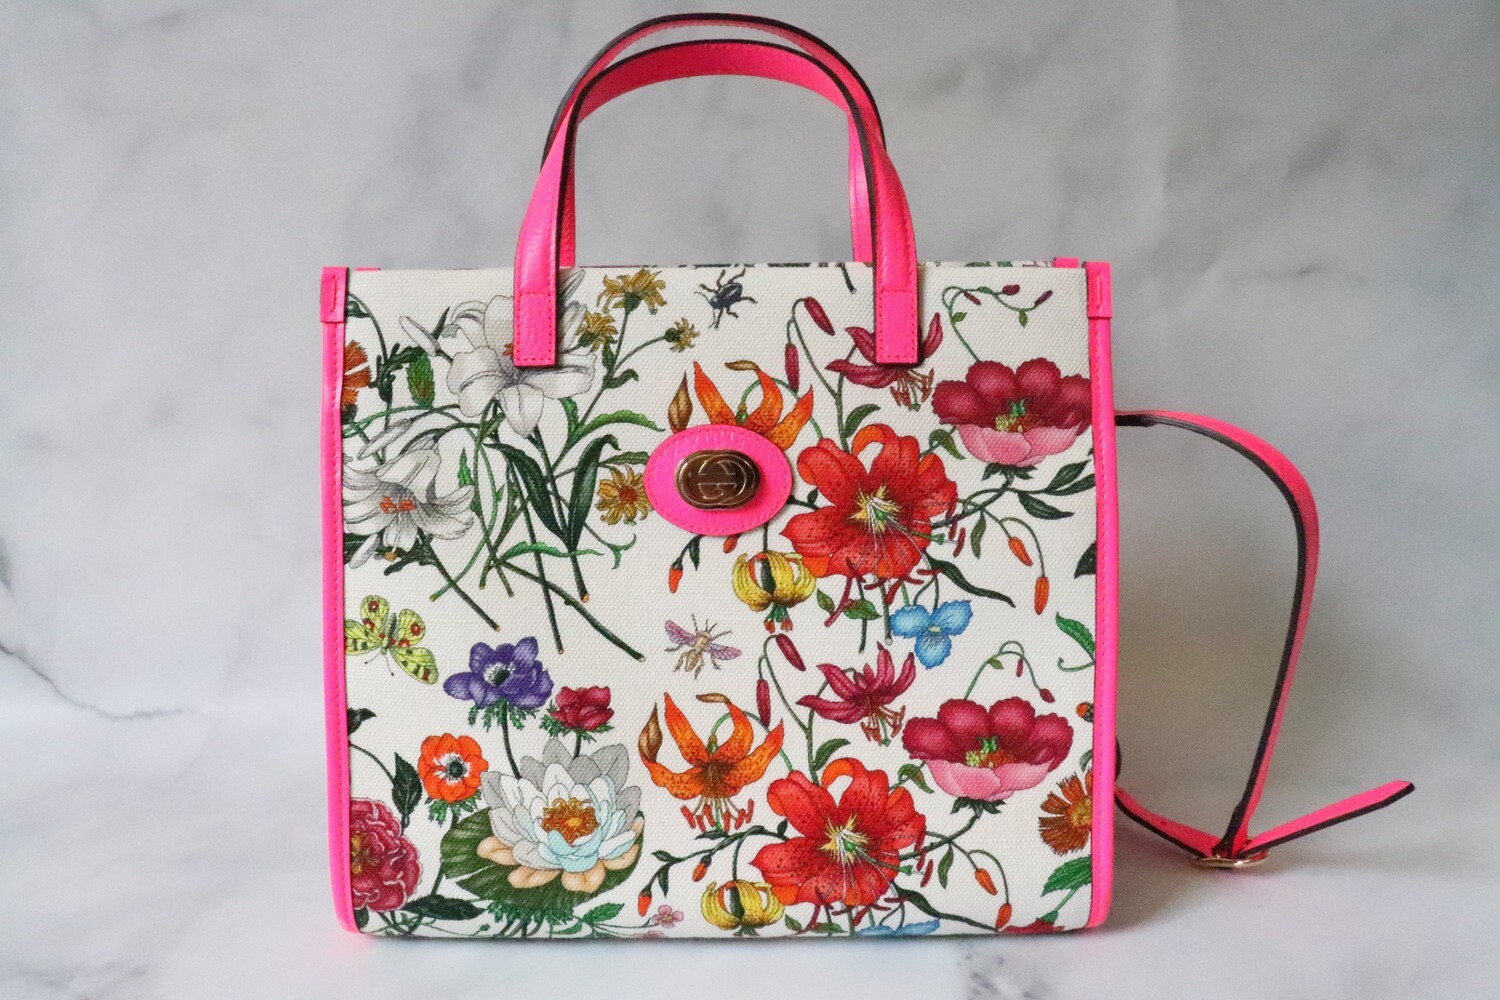 Gucci Floral Tote Pink Trim, New in Dustbag